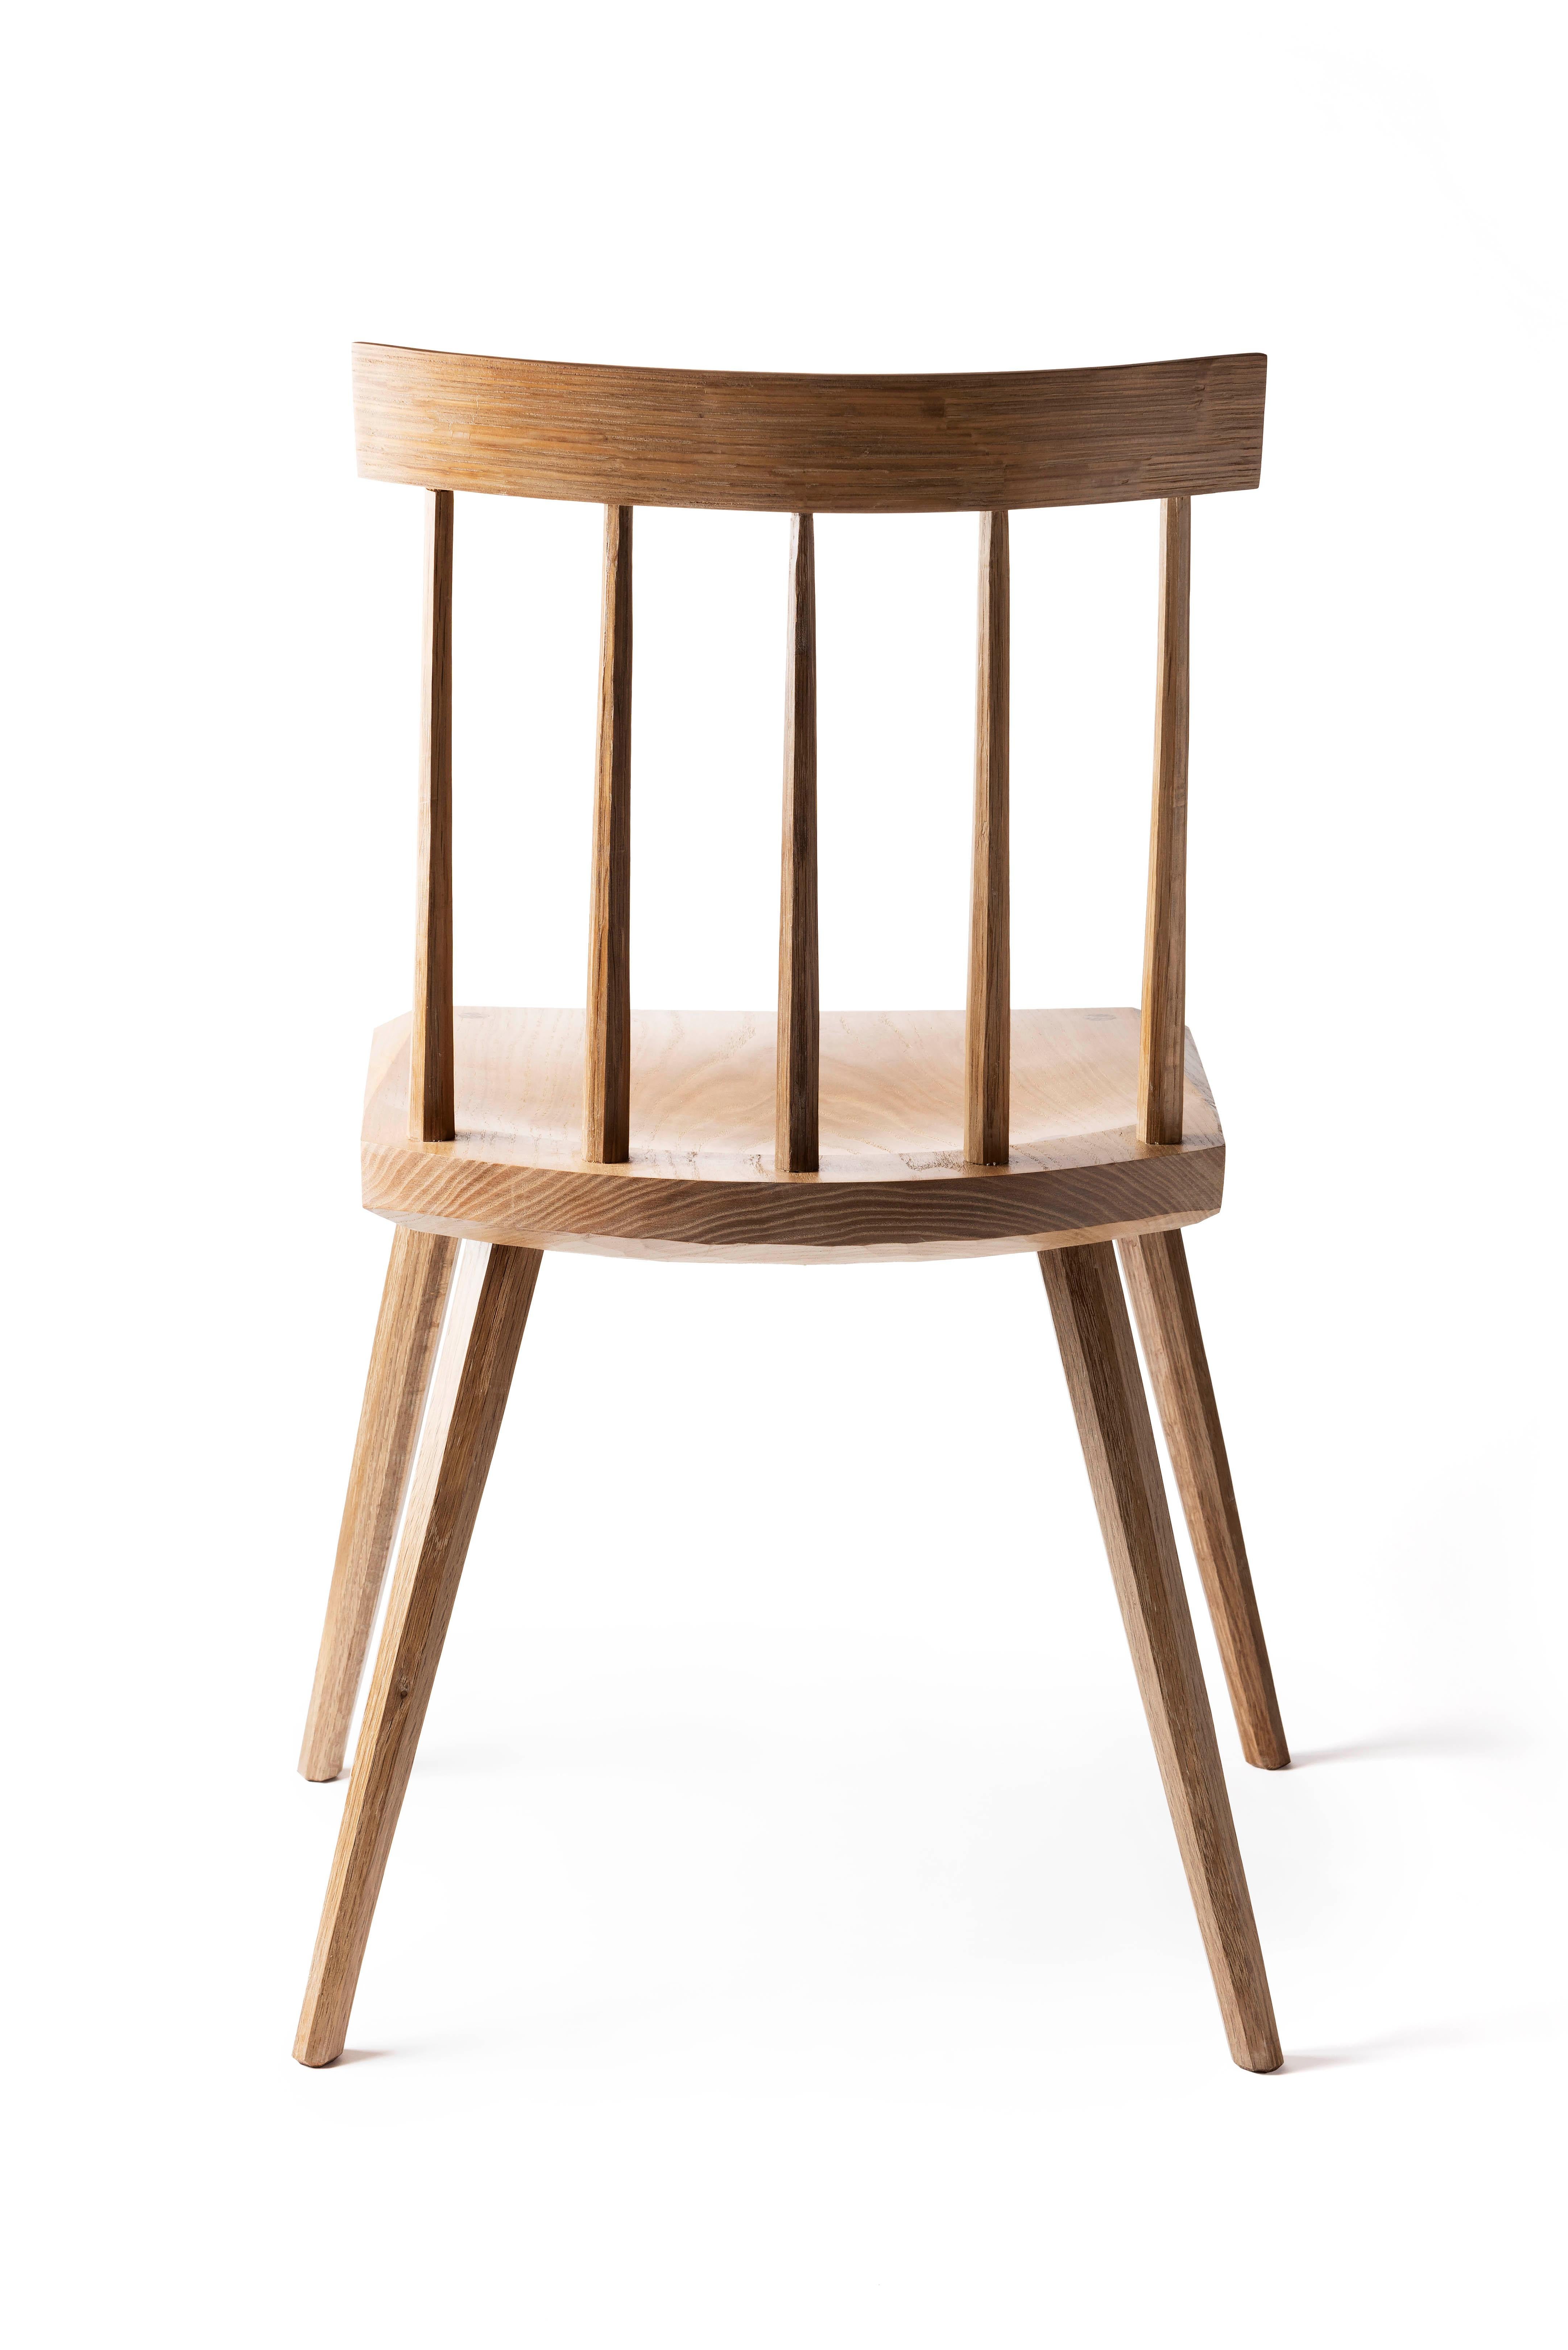 A reimagining of a classic Windsor chair that blends contemporary proportions with classical construction and ornamentation. Designed and built entirely by Aspen Golann in her studio in Southern Maine. These pieces are made entirely by hand and